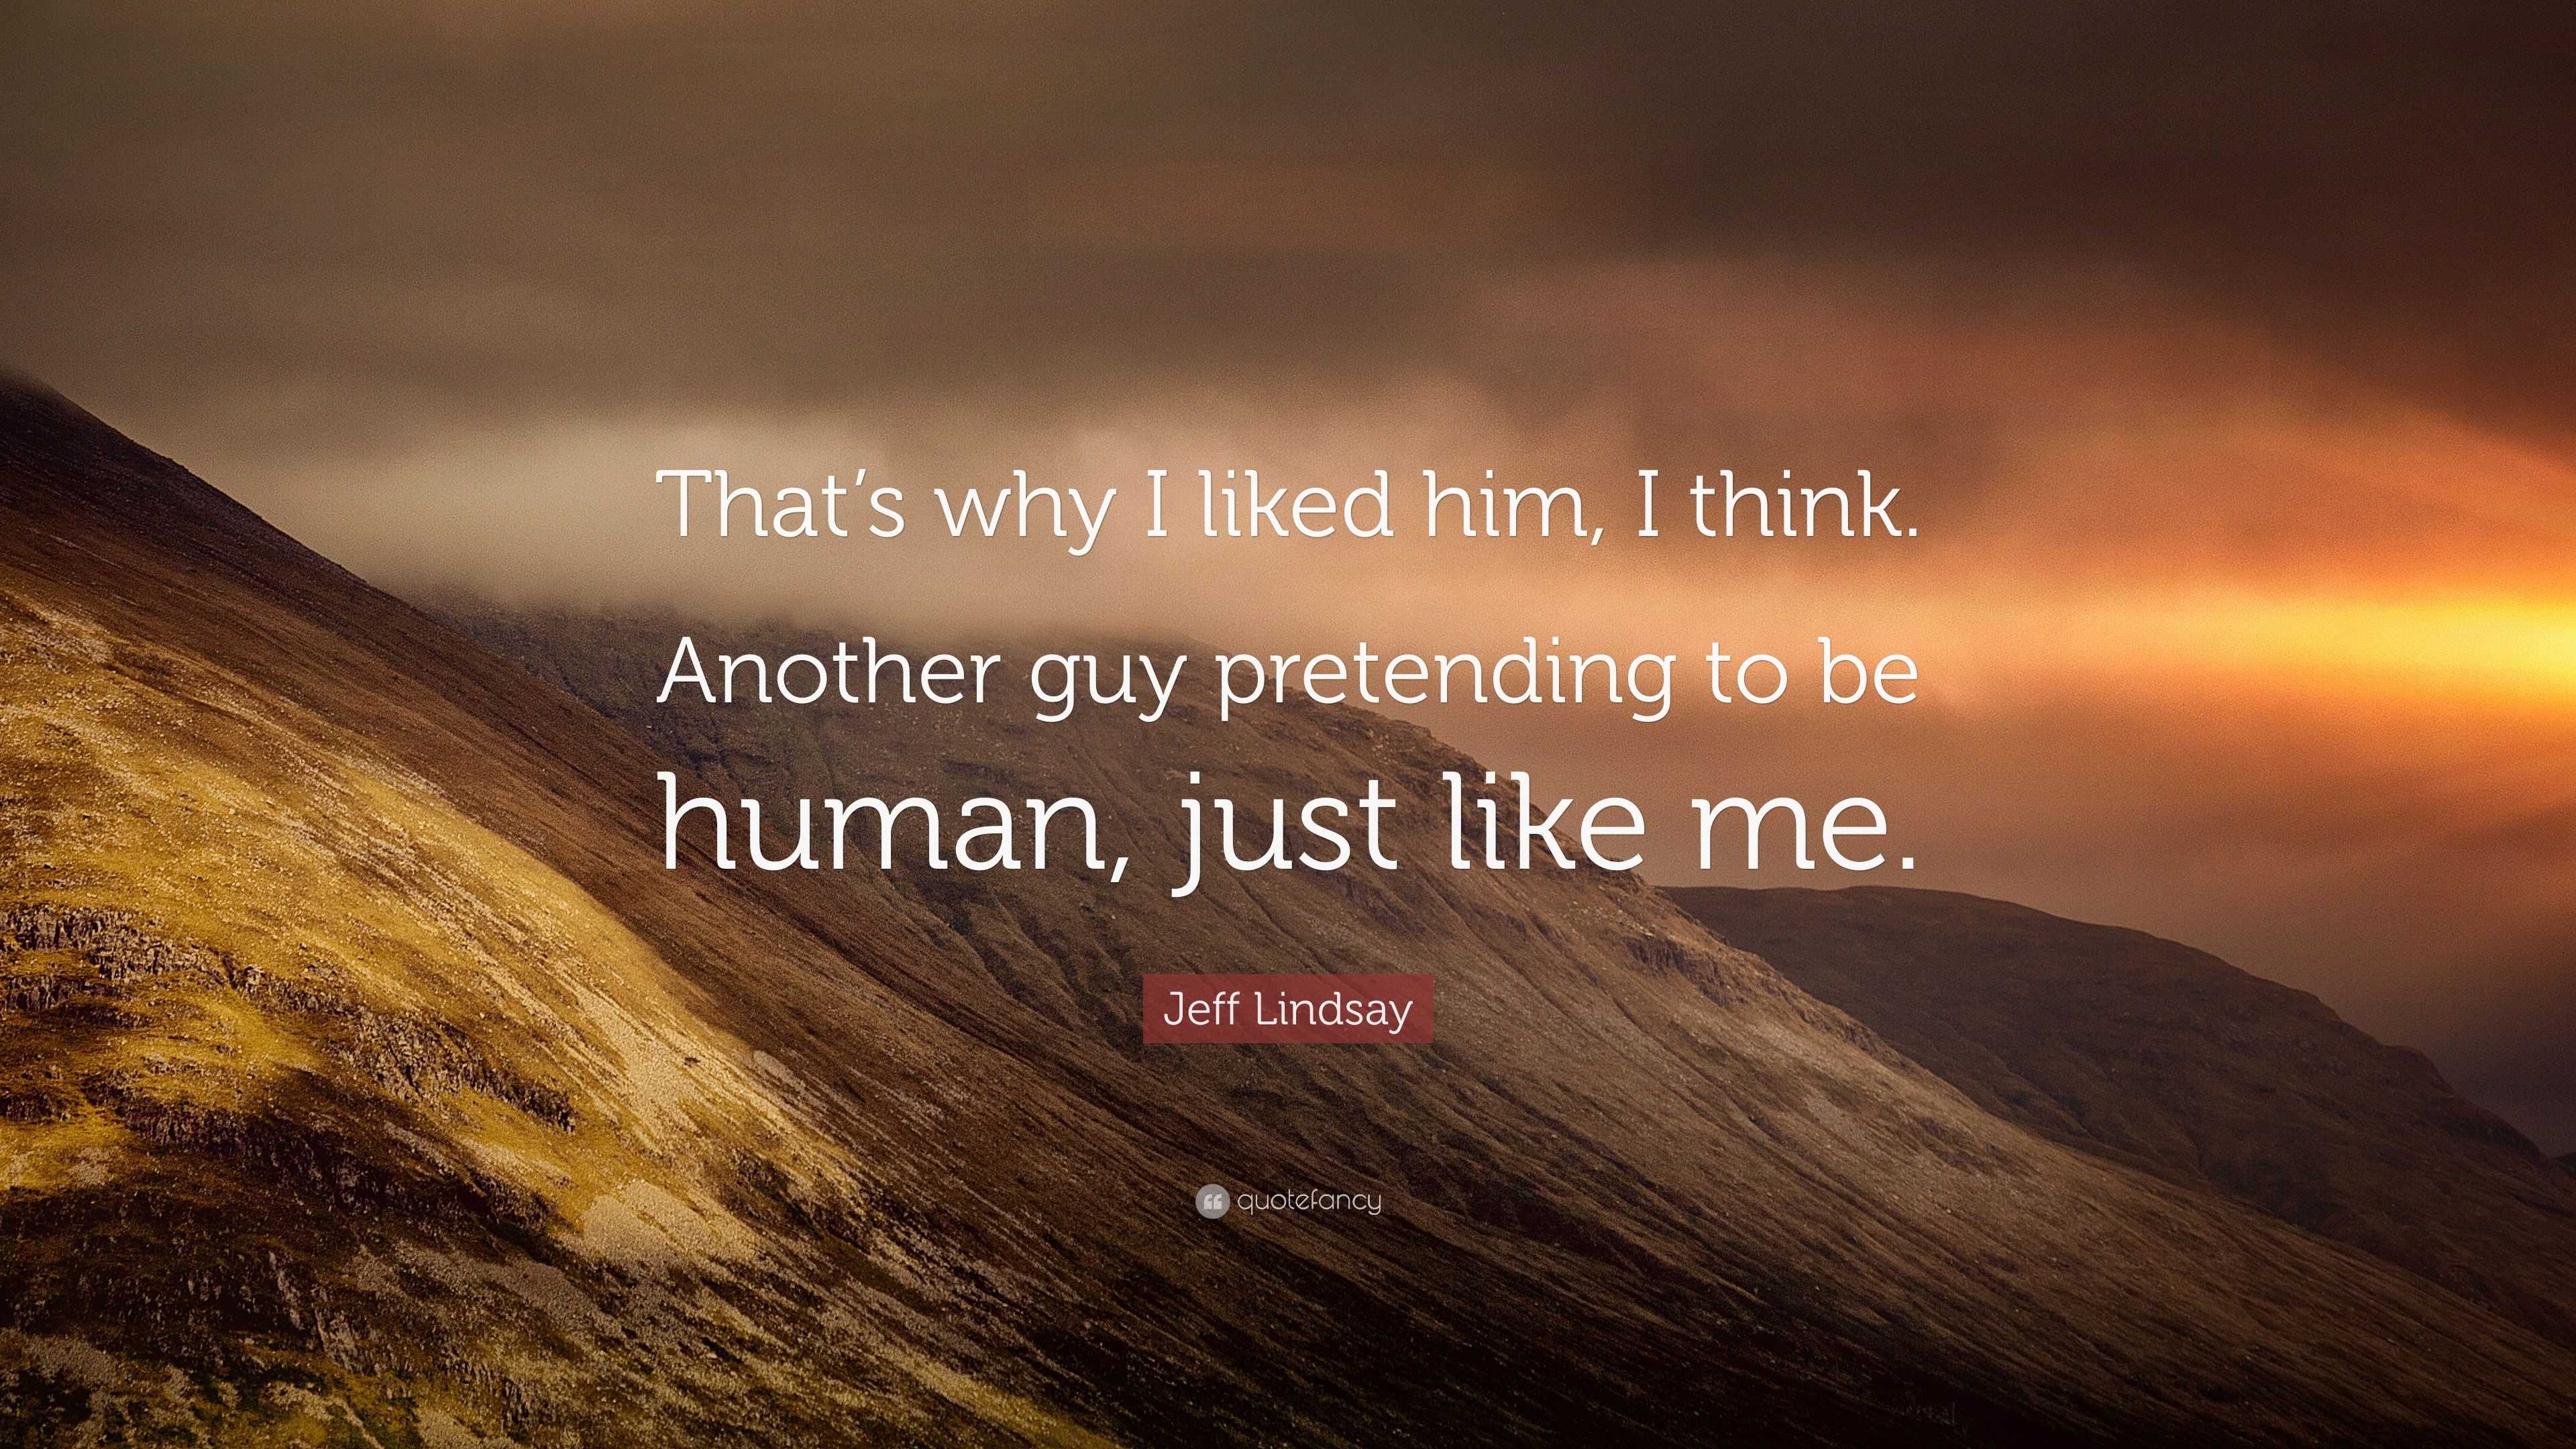 Jeff Lindsay Quote: “That's why I liked him, I think. Another guy pretending  to be human